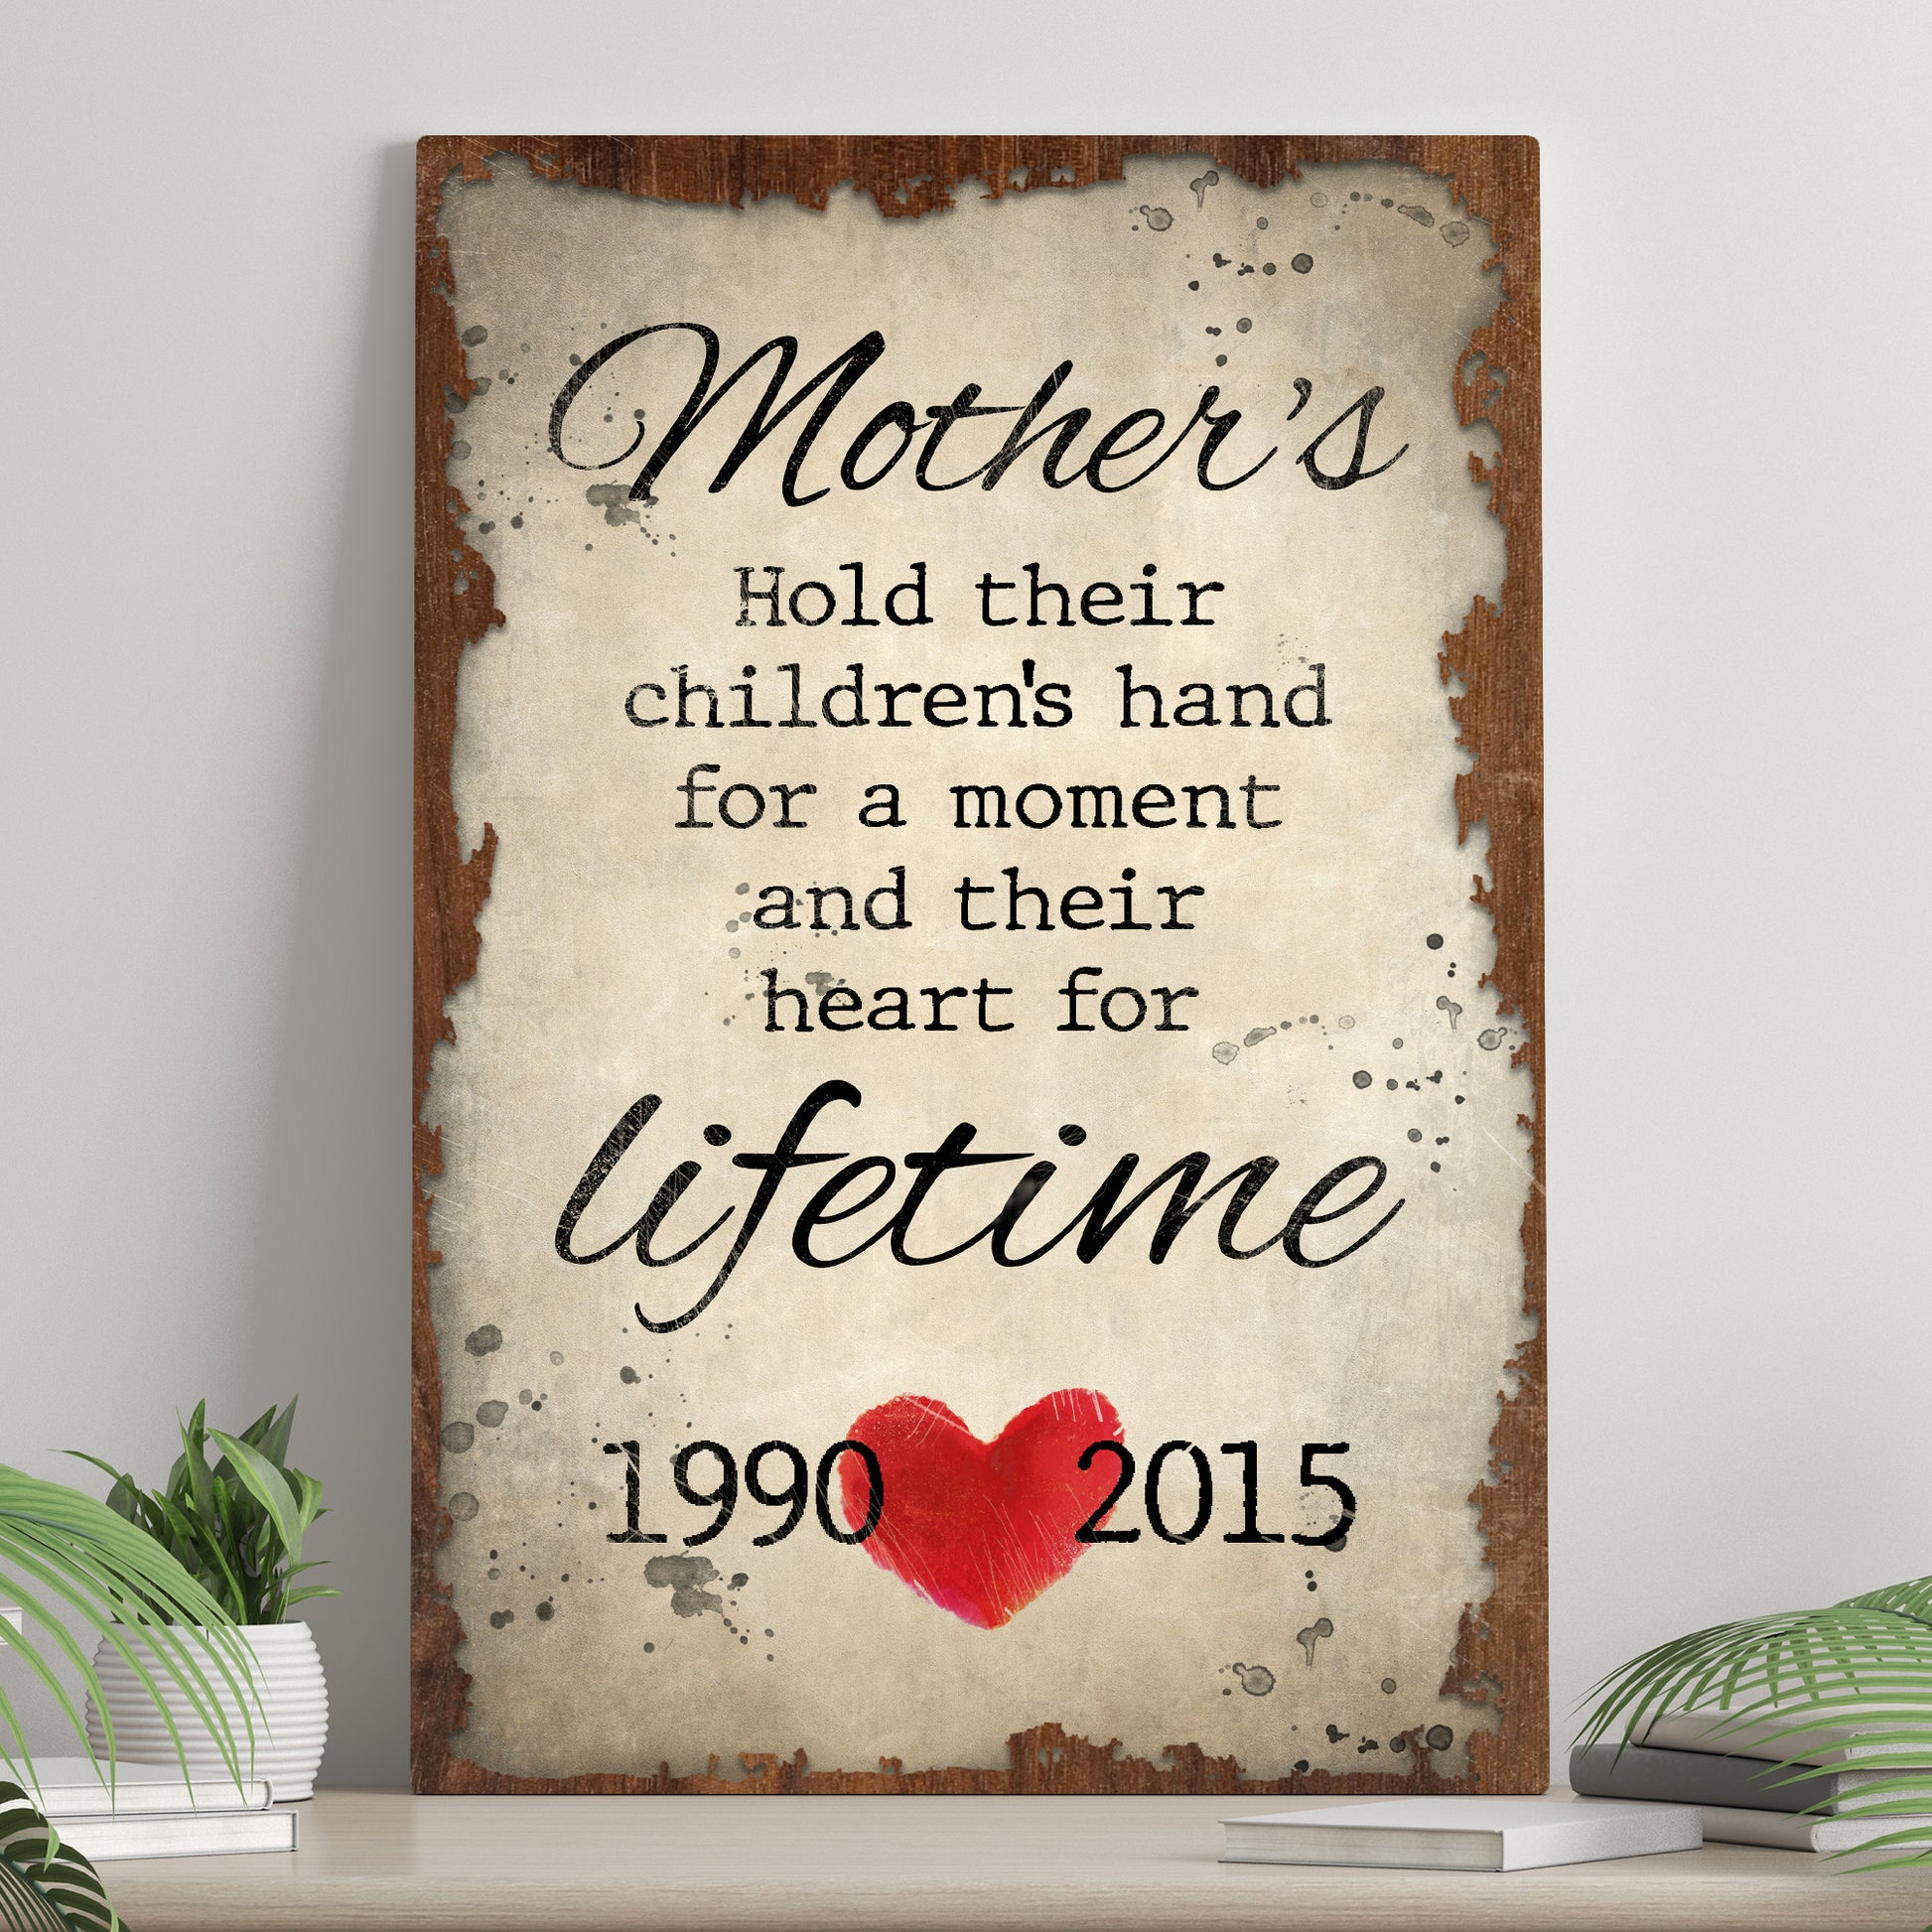 Mother's Hold Their Children's Hand Sign  - Image by Tailored Canvases